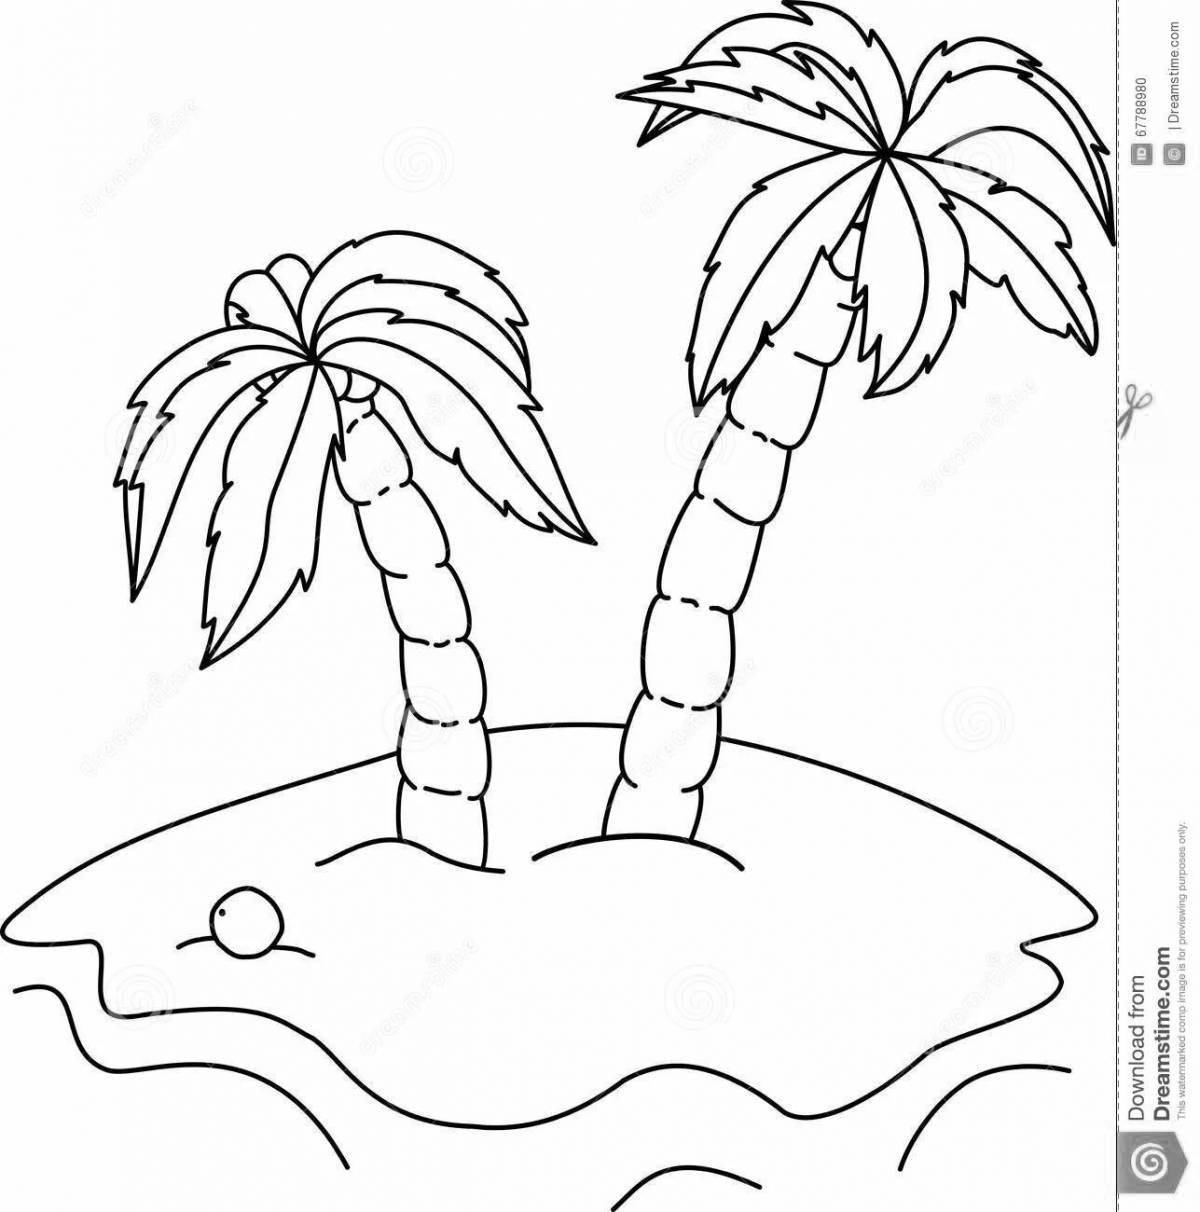 Coloring page gorgeous island for kids